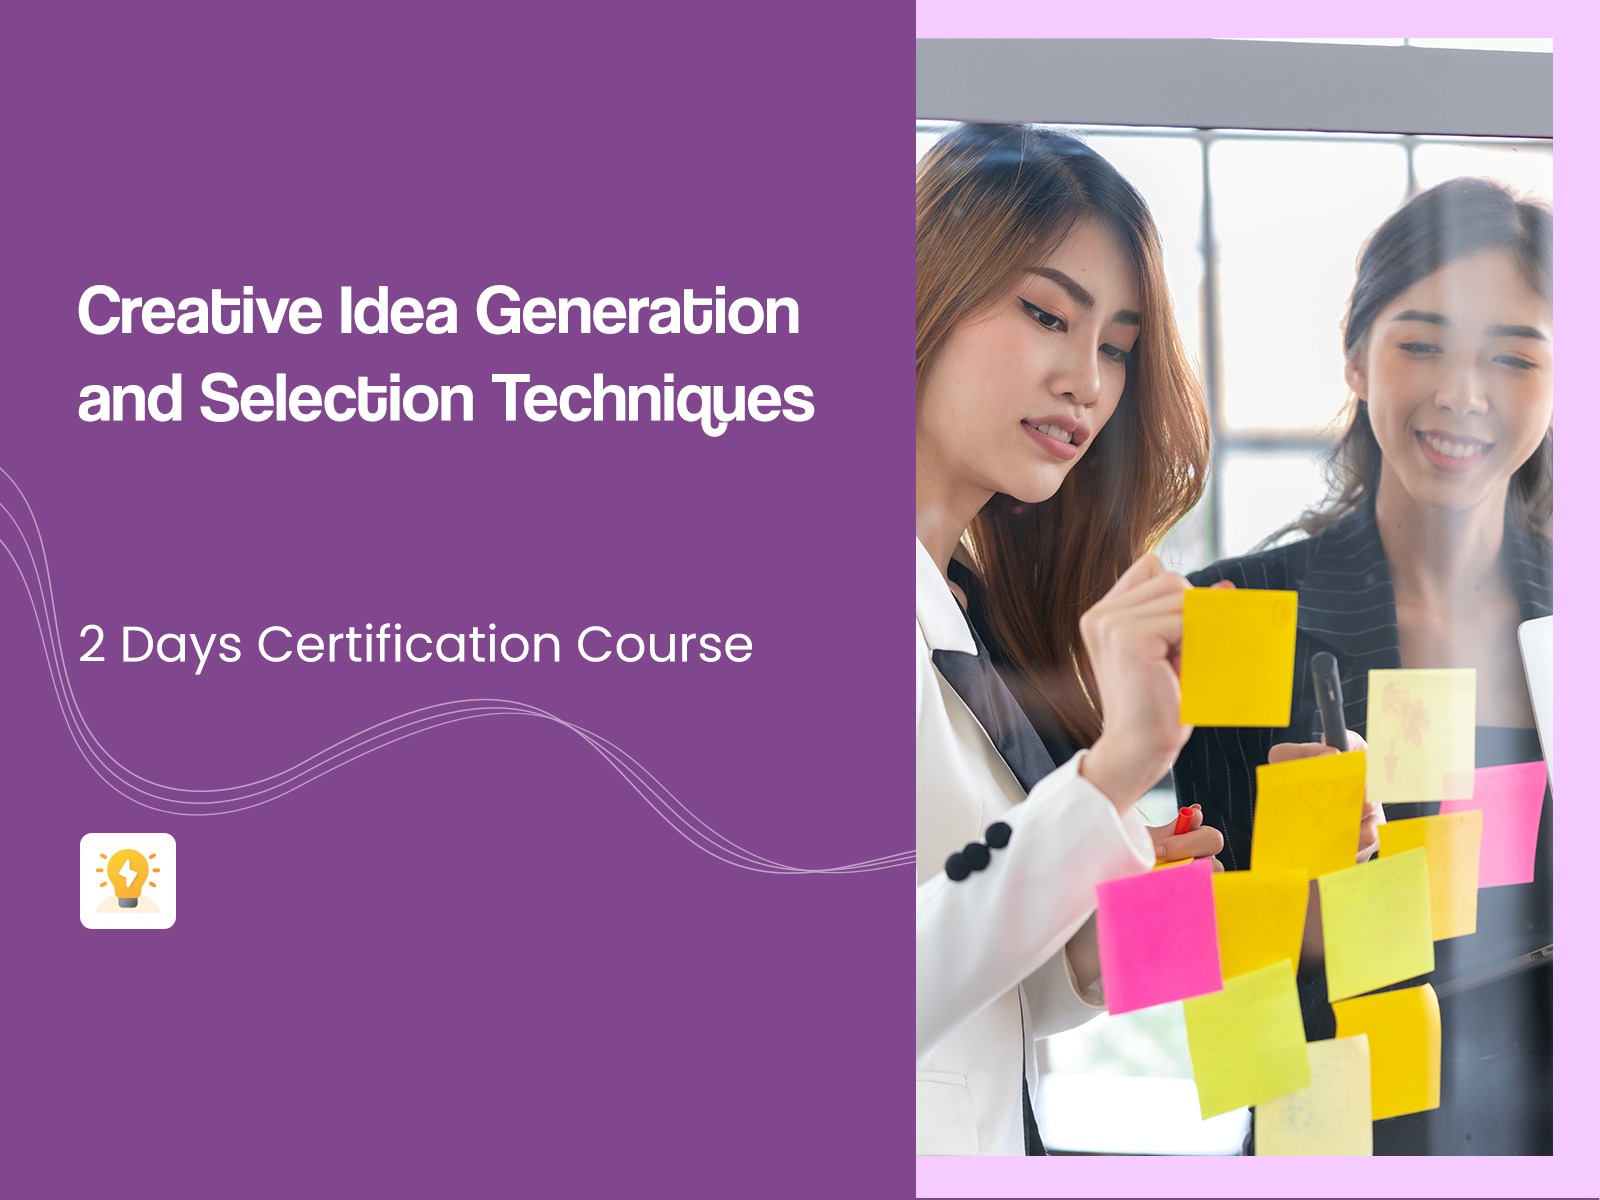 Creative Idea Generation and Selection Techniques course in Singapore